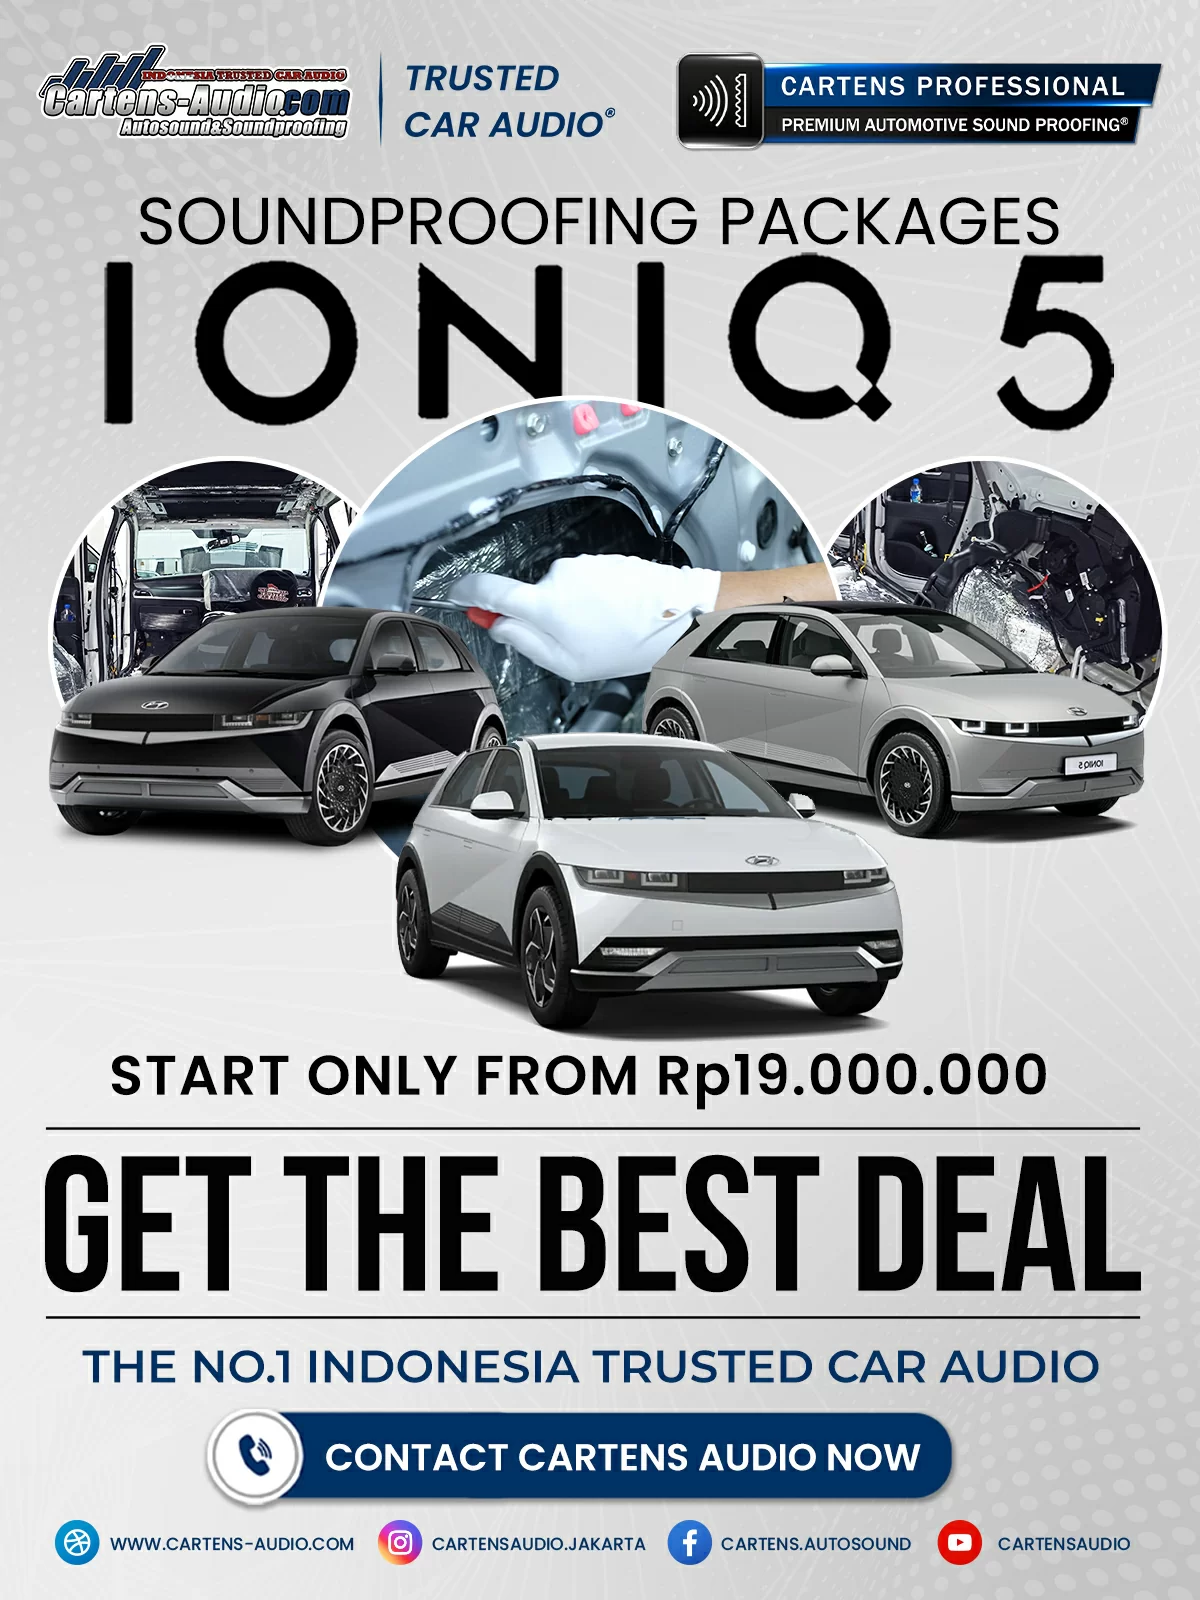 SOUNDPROOFING PACKAGES - HYUNDAI IONIQ 5